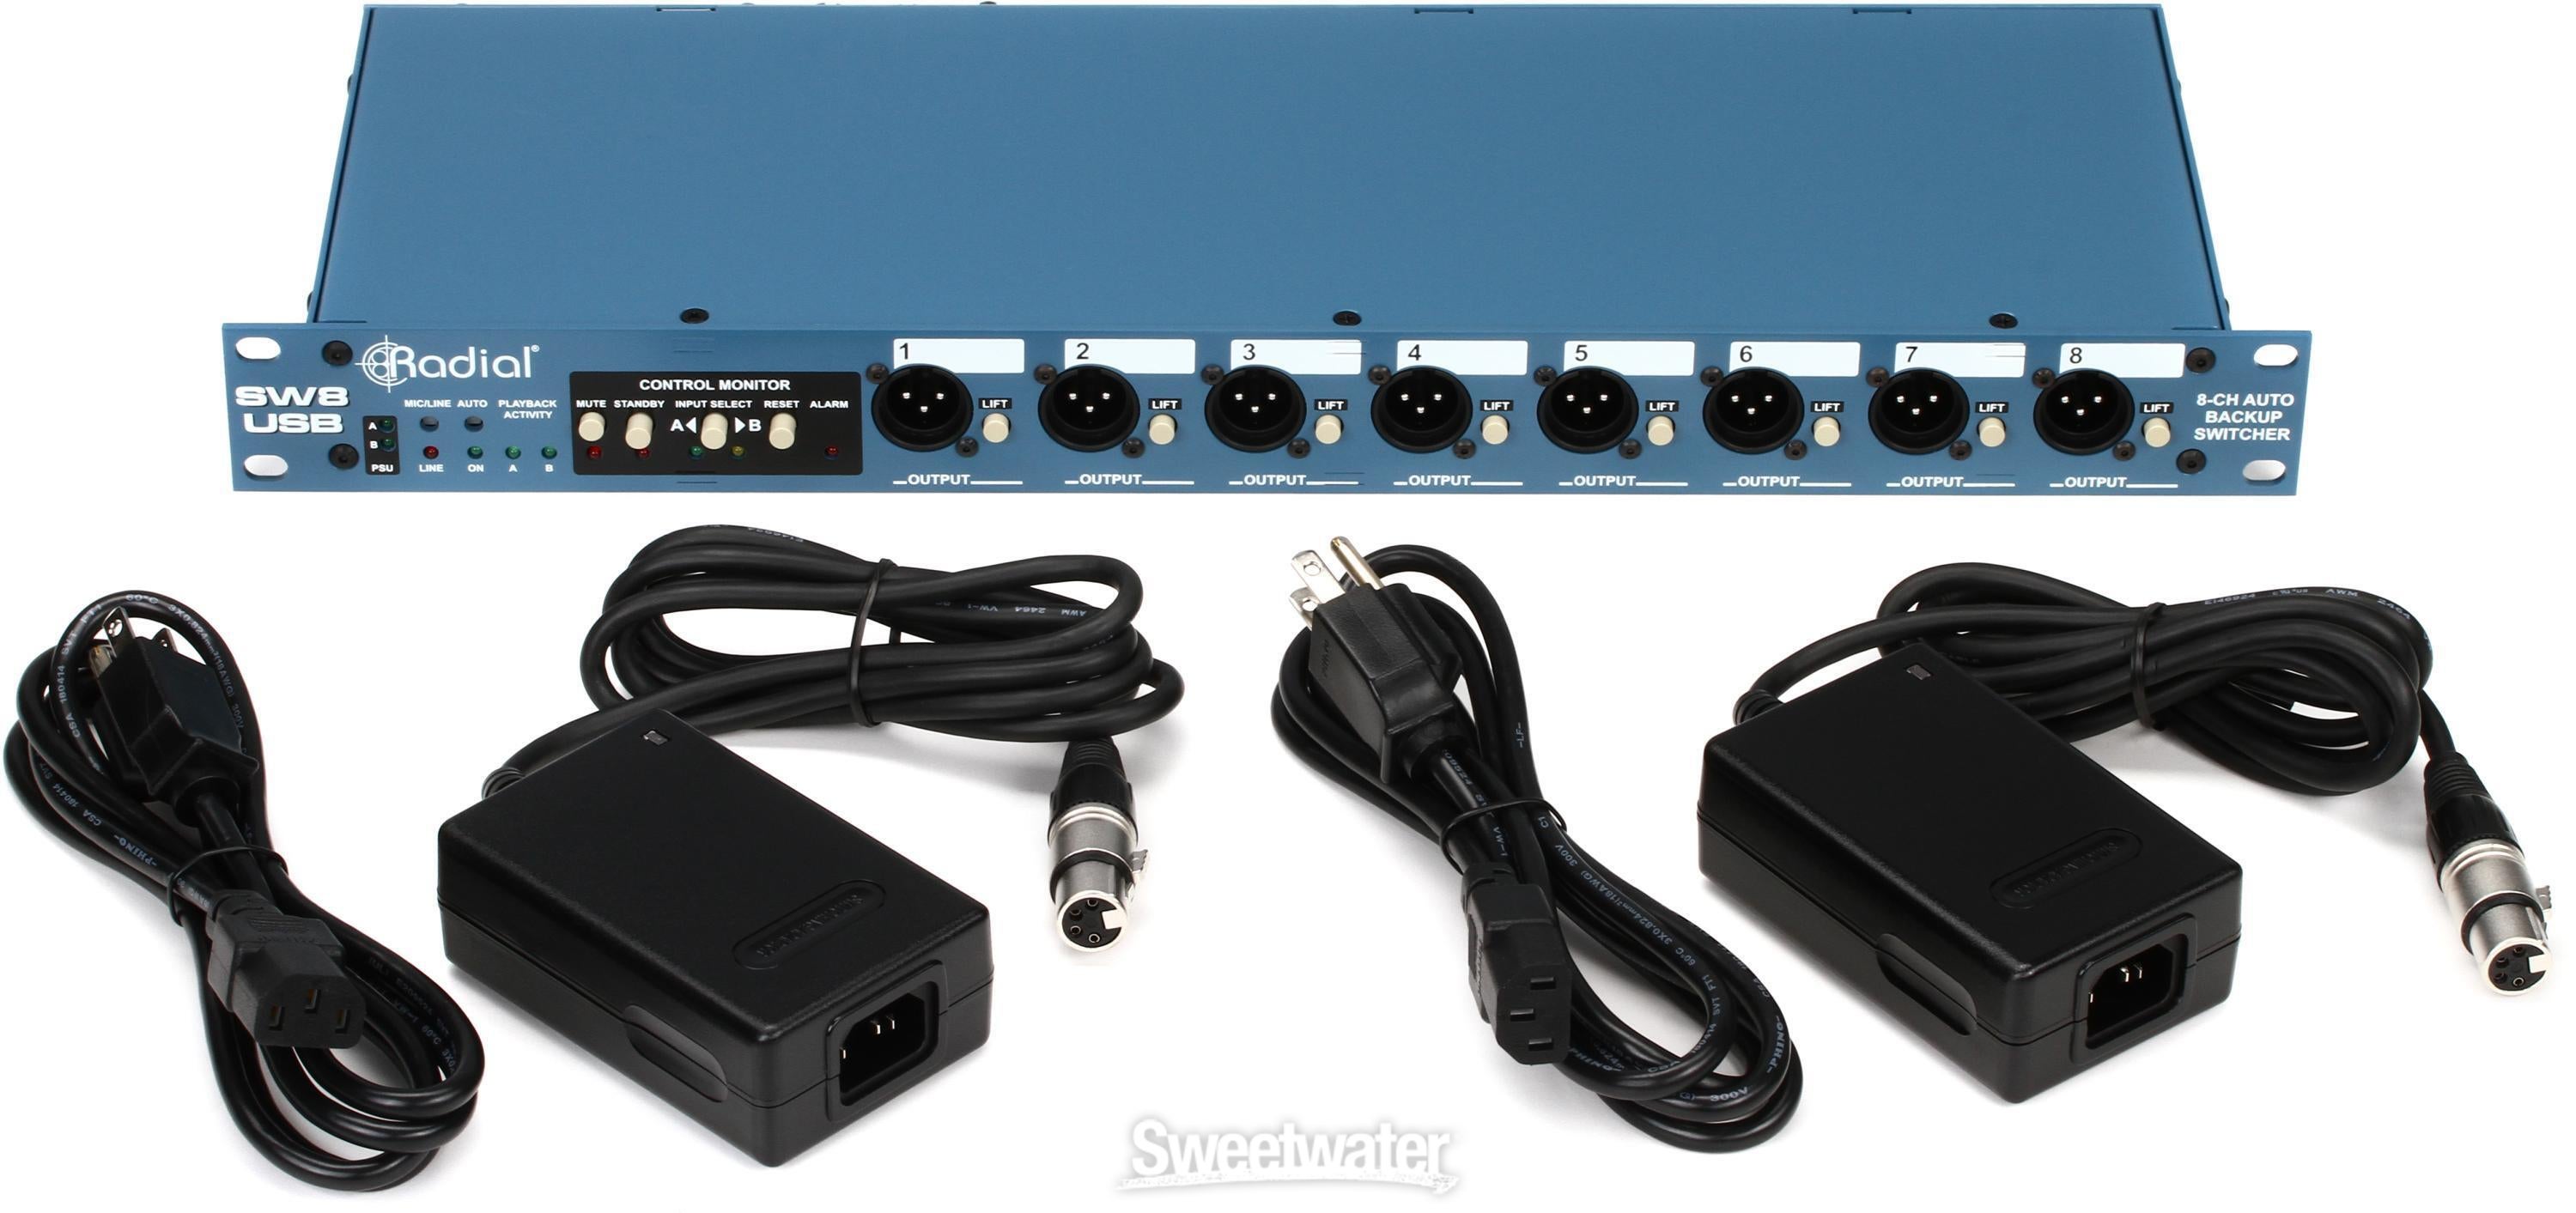 Radial SW8-USB Dual-USB Auto-Switcher and Interface | Sweetwater